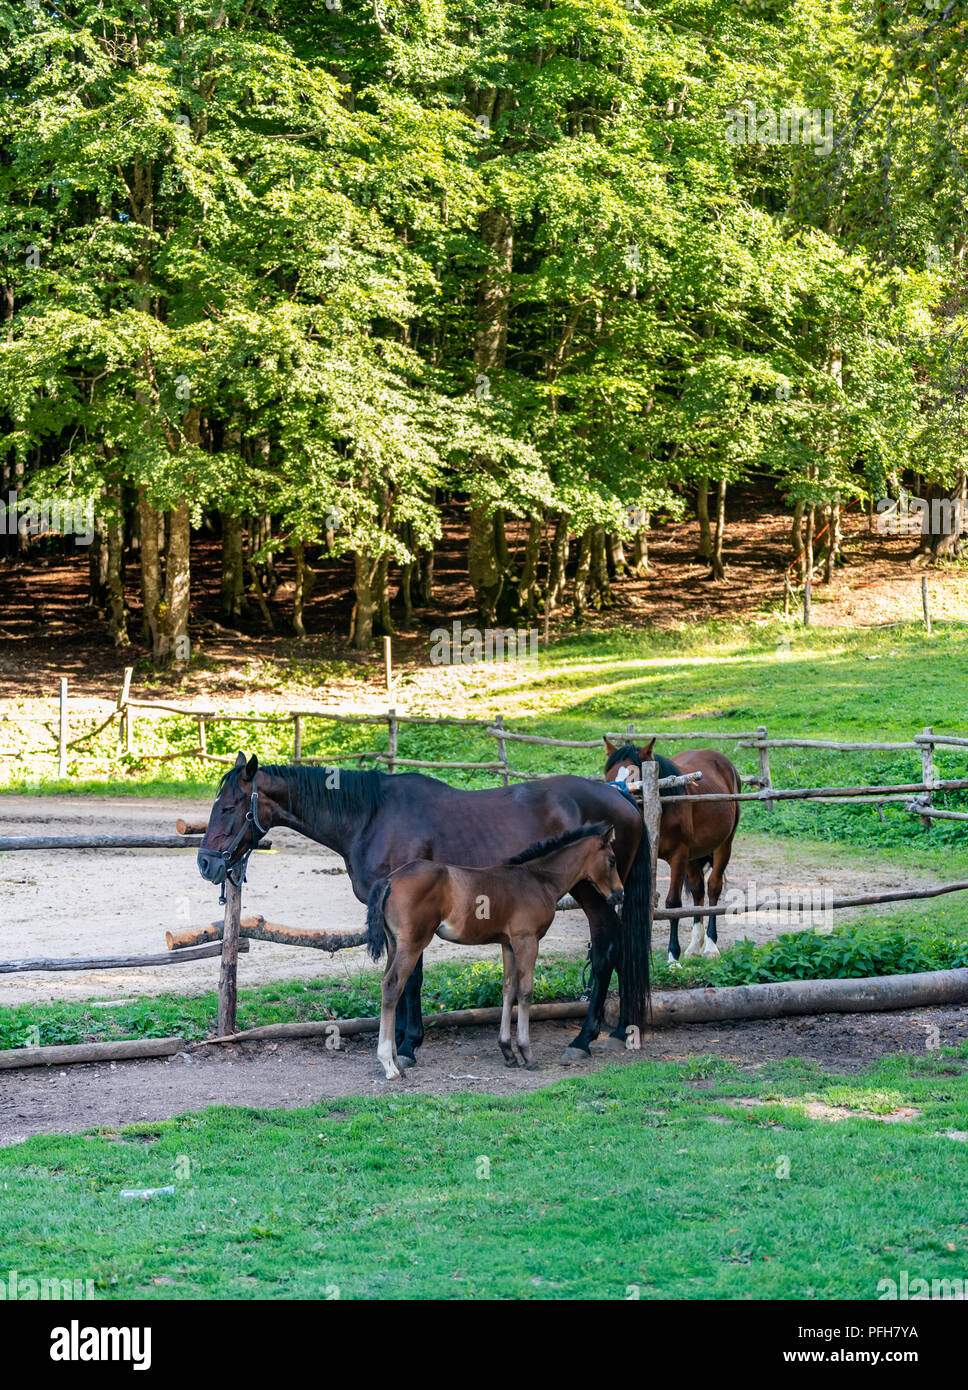 Three horses in stables two adults and one colt tranquil scene, forest in background Stock Photo